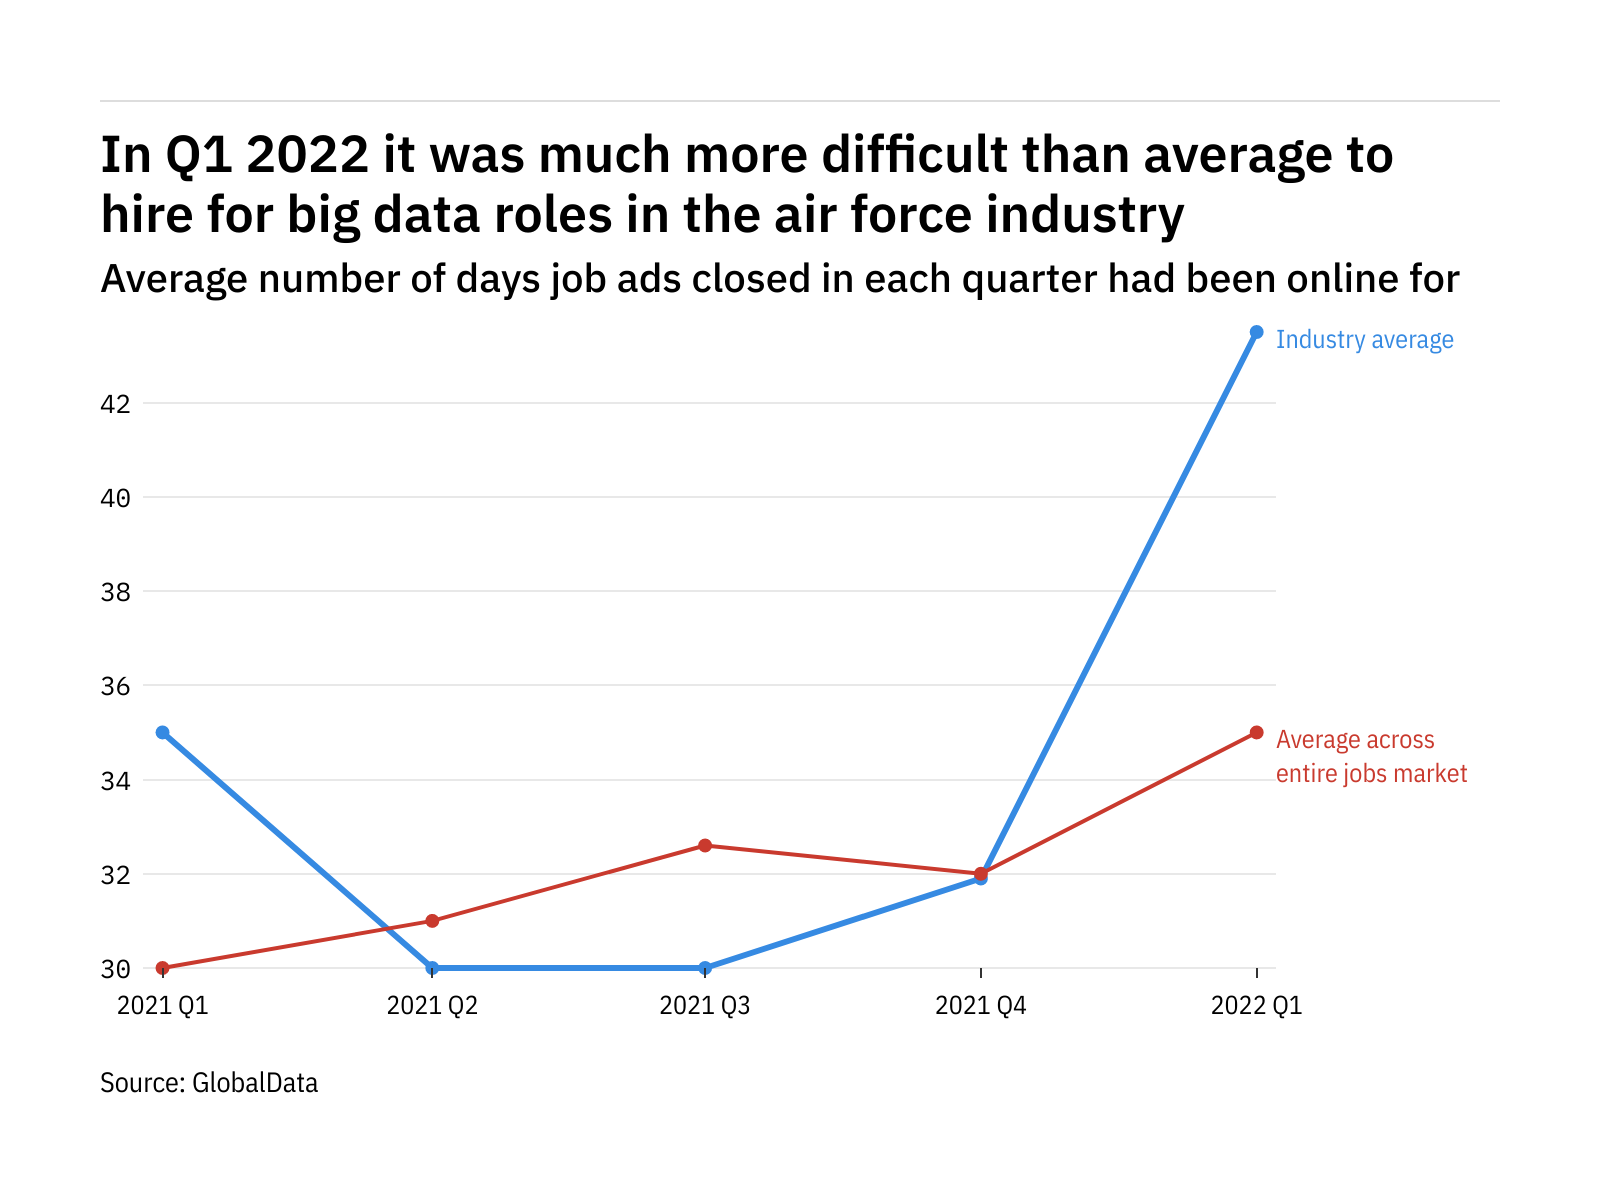 The air force industry found it harder to fill big data vacancies in Q1 2022